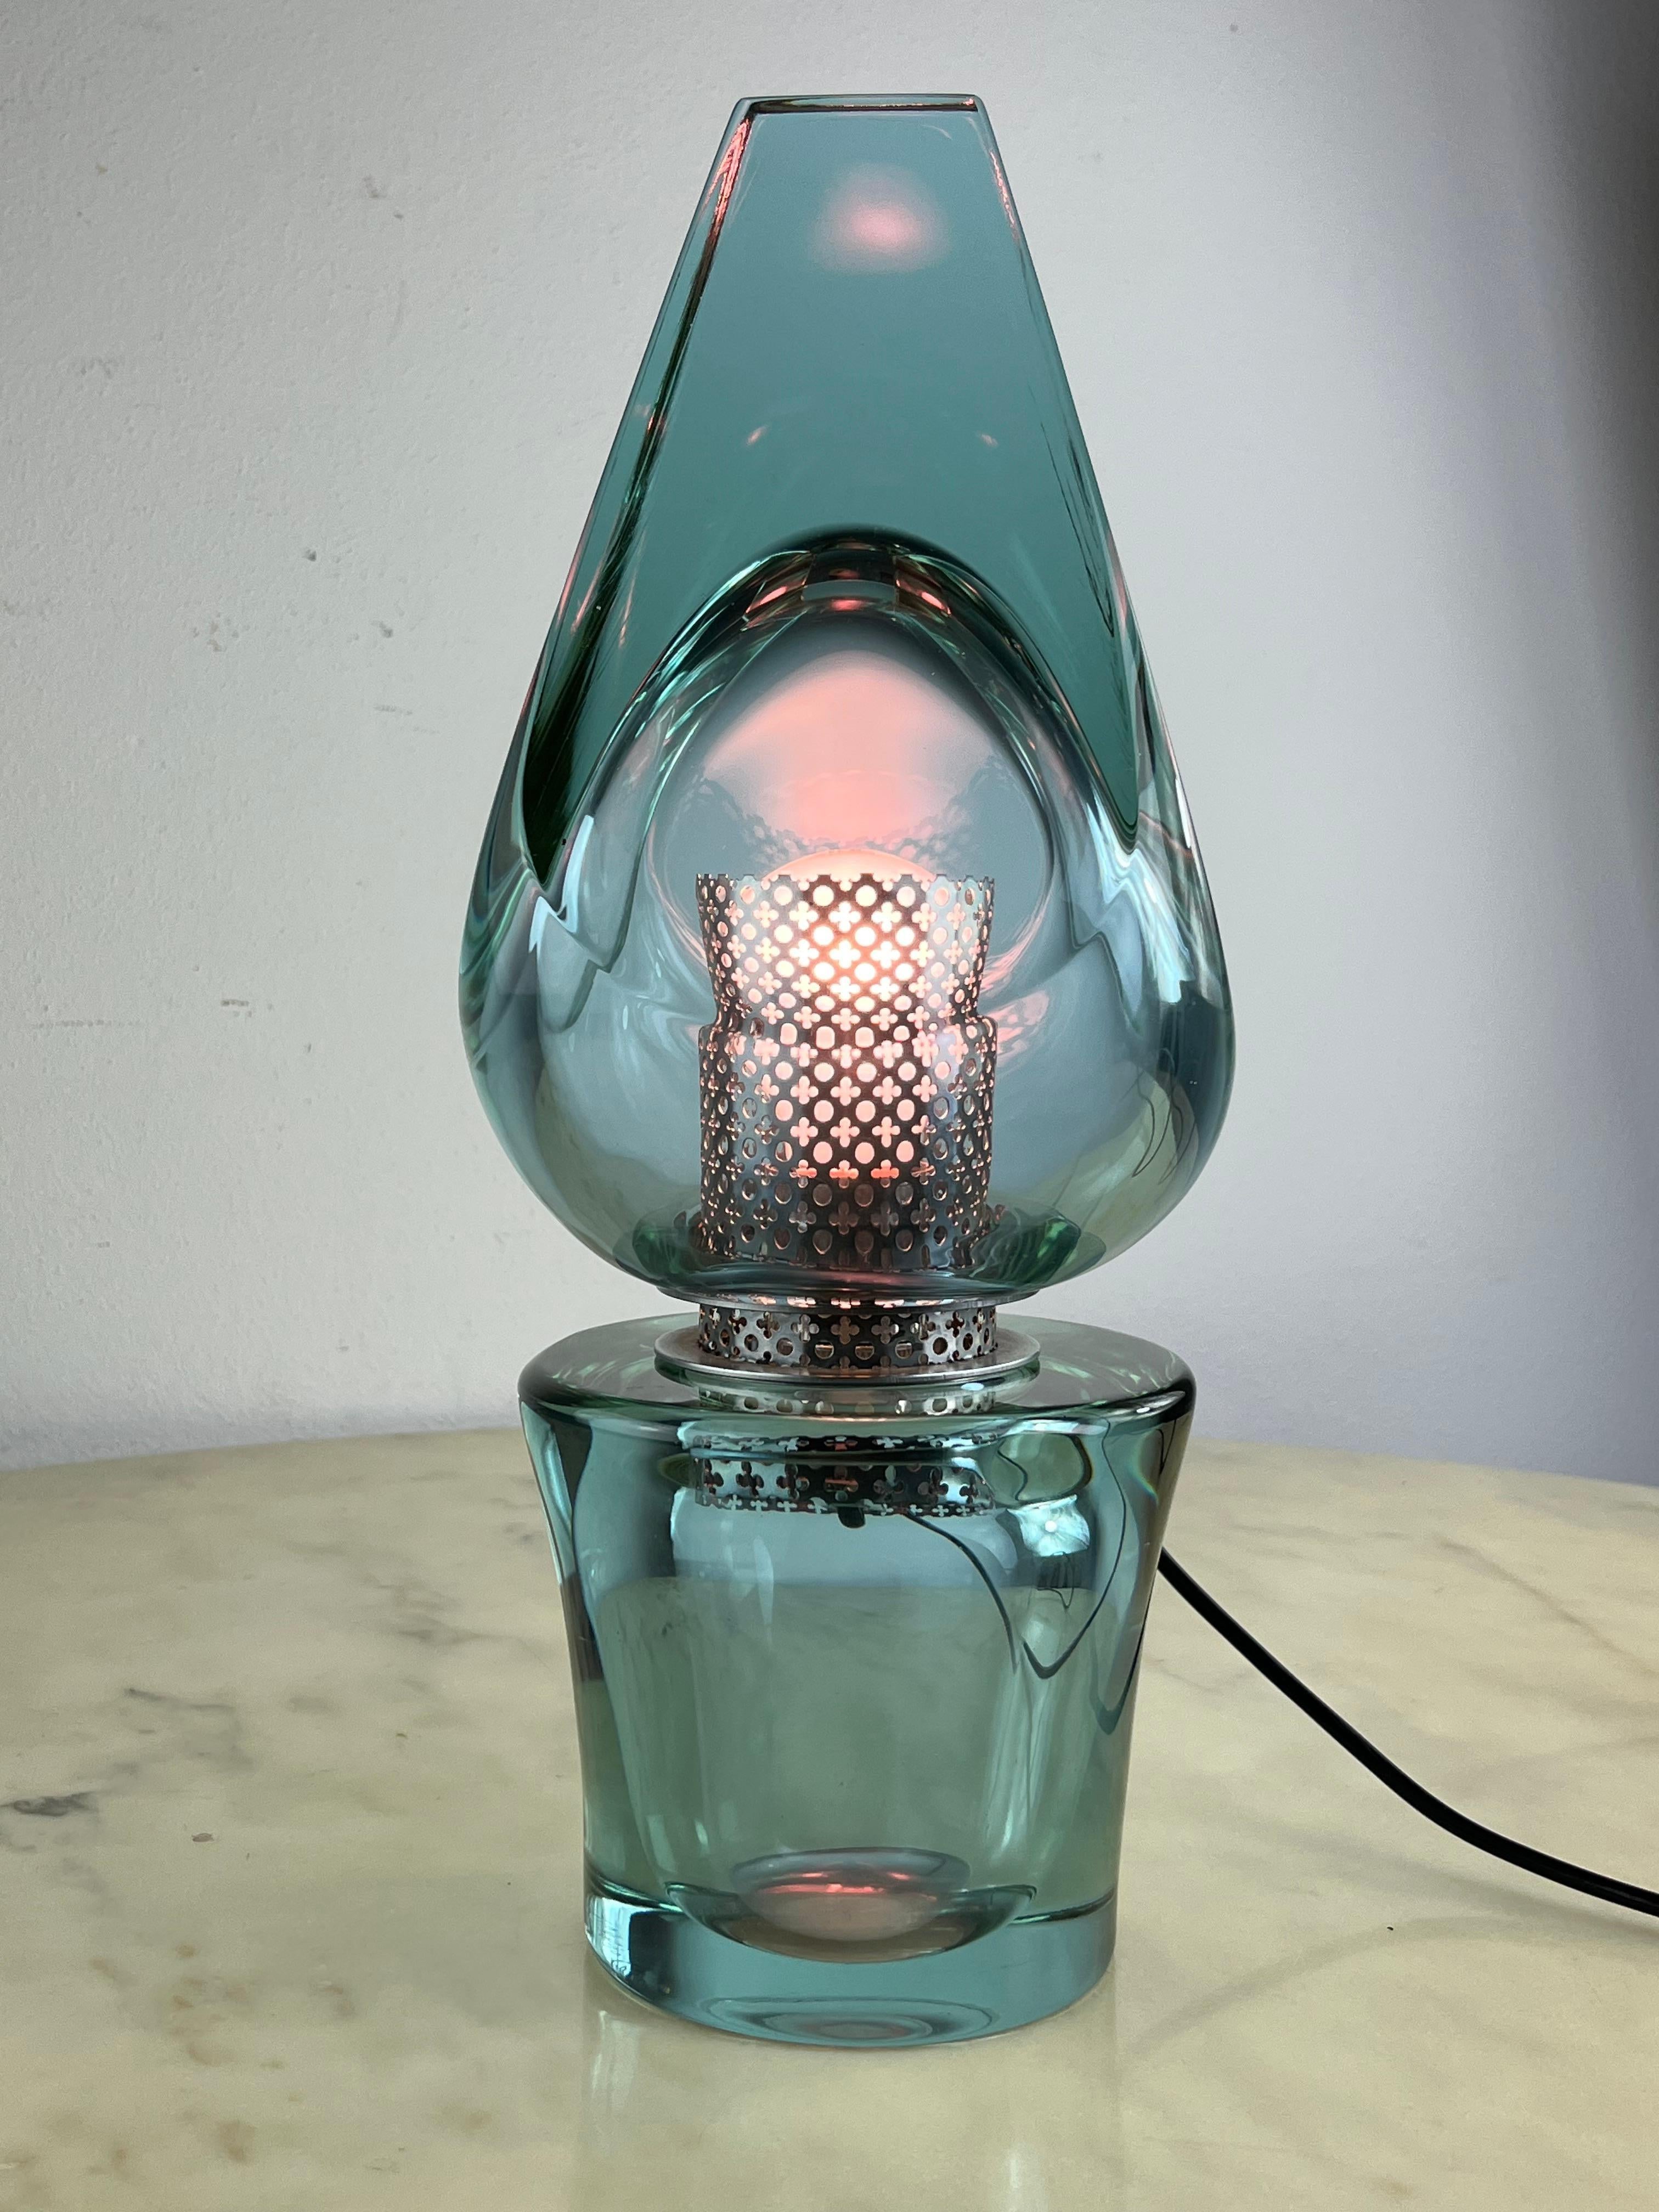 Mid-Century Nile green Murano glass table lamp attributed to Seguso 1972
Intact and working, E27 lamp
Made in 1972 by the Venetian glassmaker Navagero for Seguso, as engraved on the bottom of the base.
The glass is heavy. It is easy to glimpse small